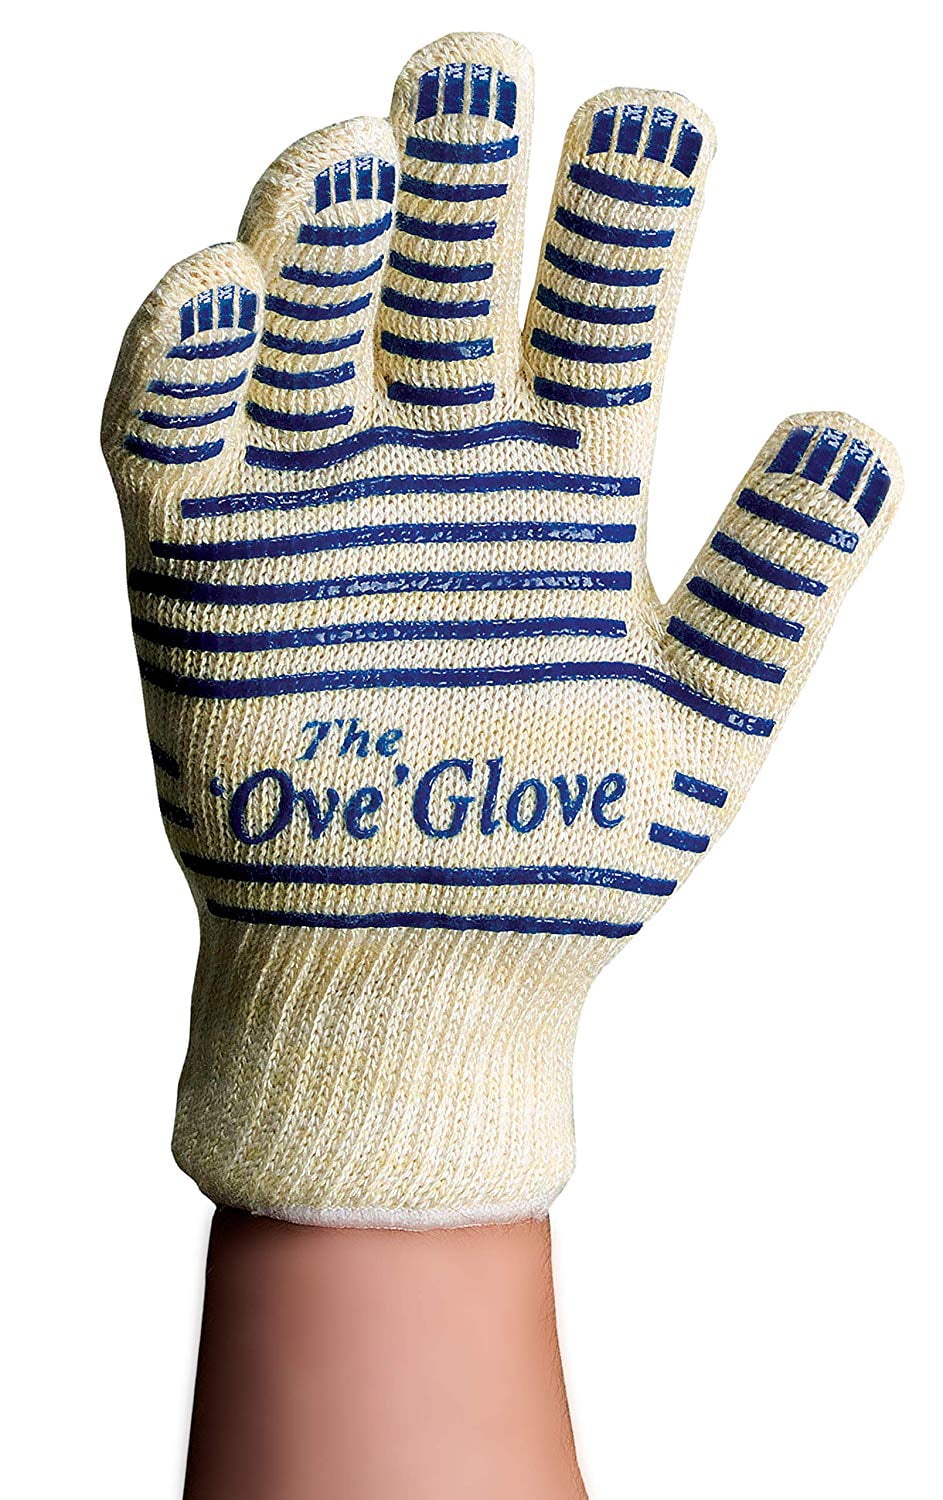 New Ove Grill Glove BBQ Oven Gloves Kitchen Heat Proof Silicon Mitts Hot Handler 